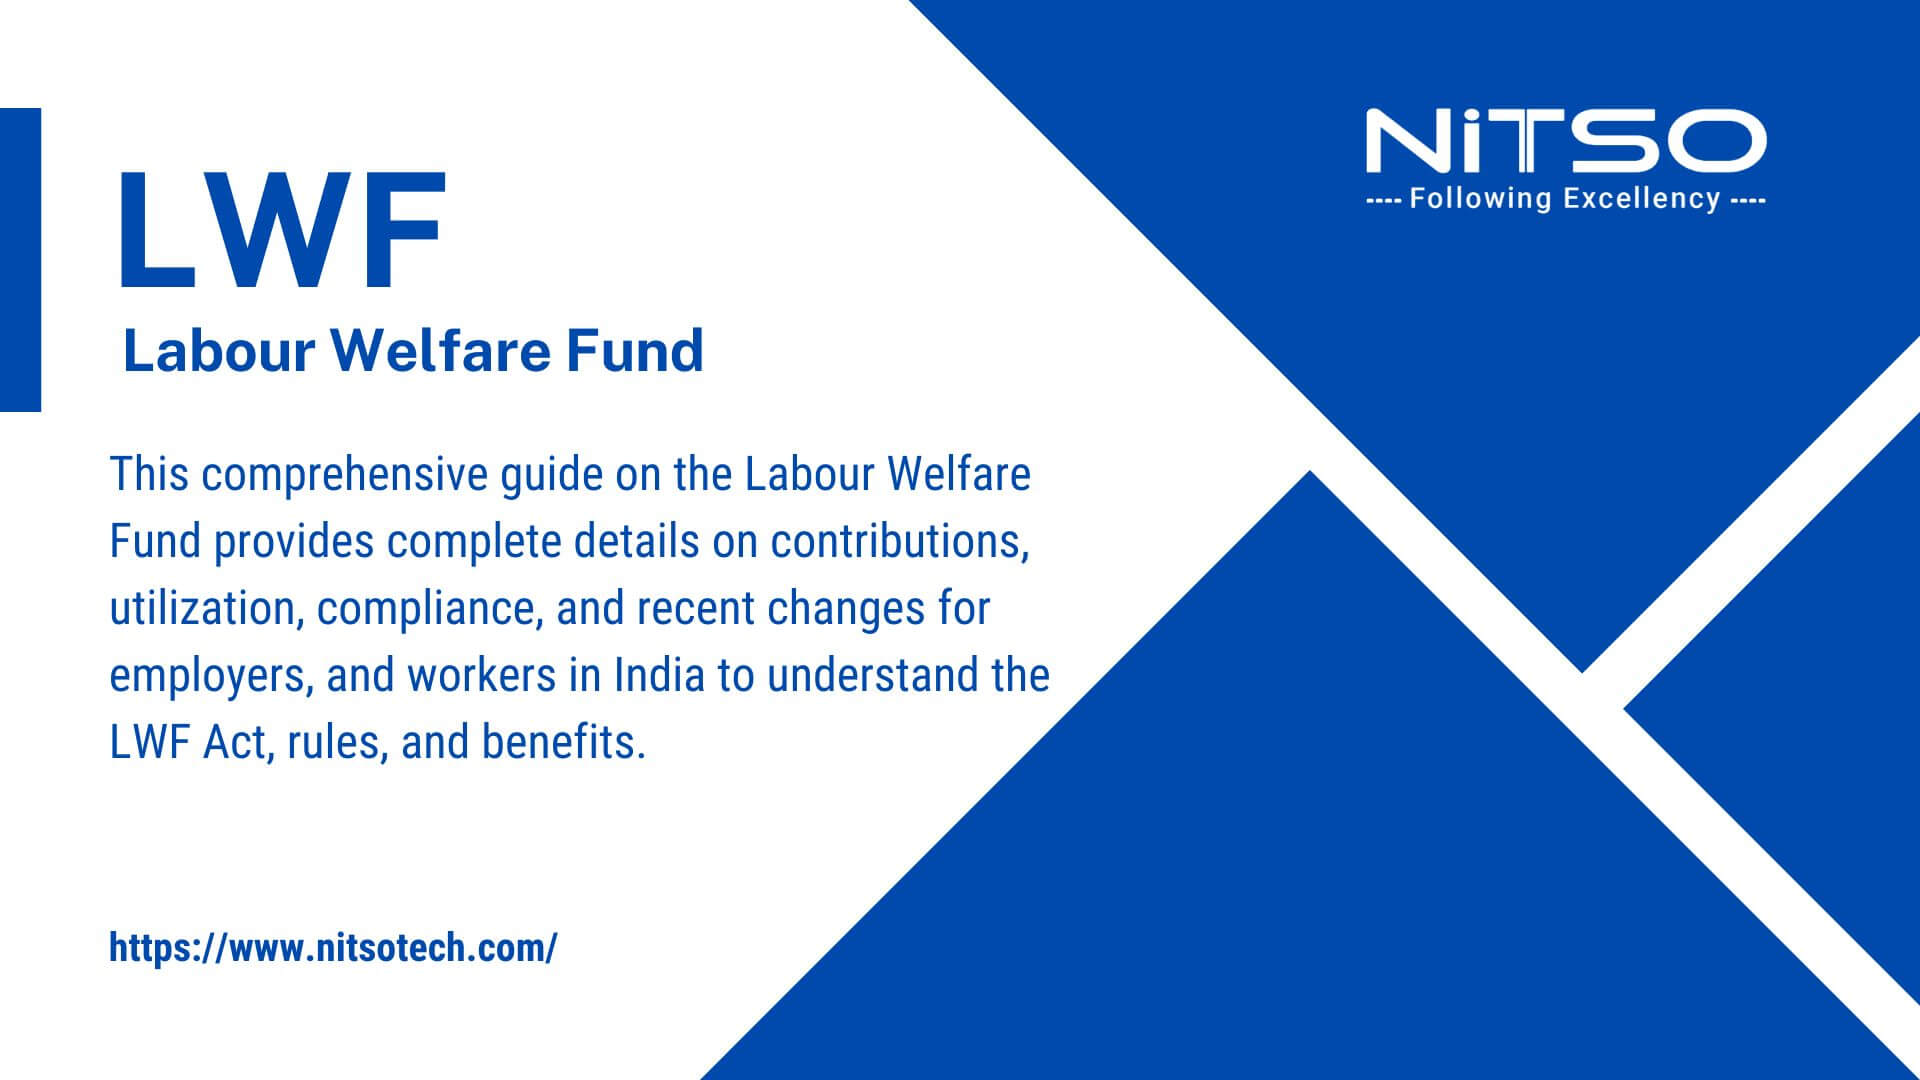 What is the Labour Welfare Fund (LWF)?